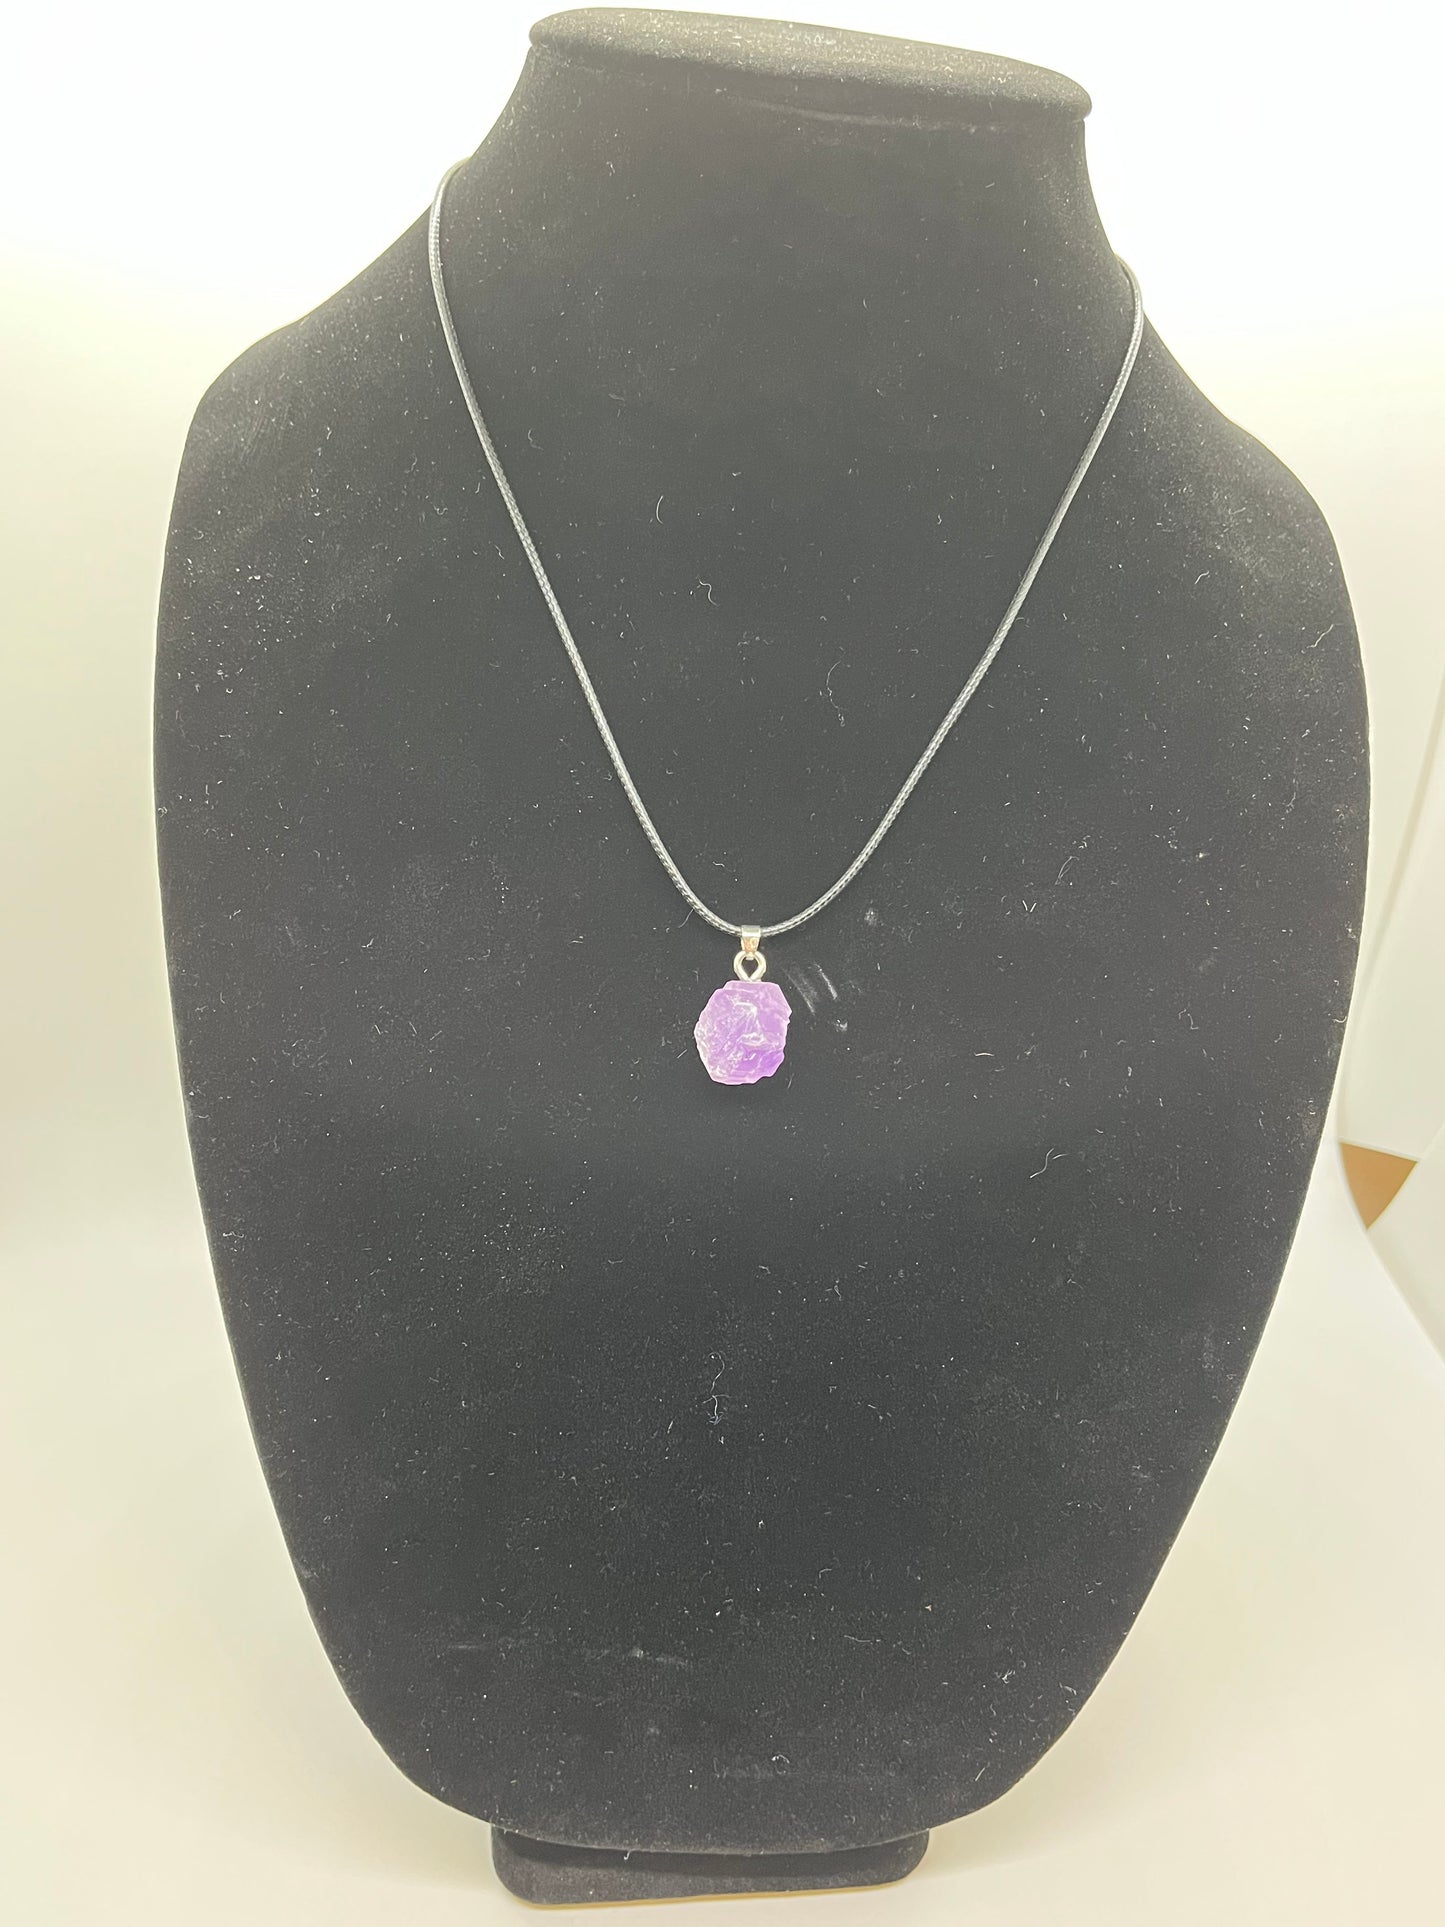 Raw Amethyst Pendant Necklace, Hand Made